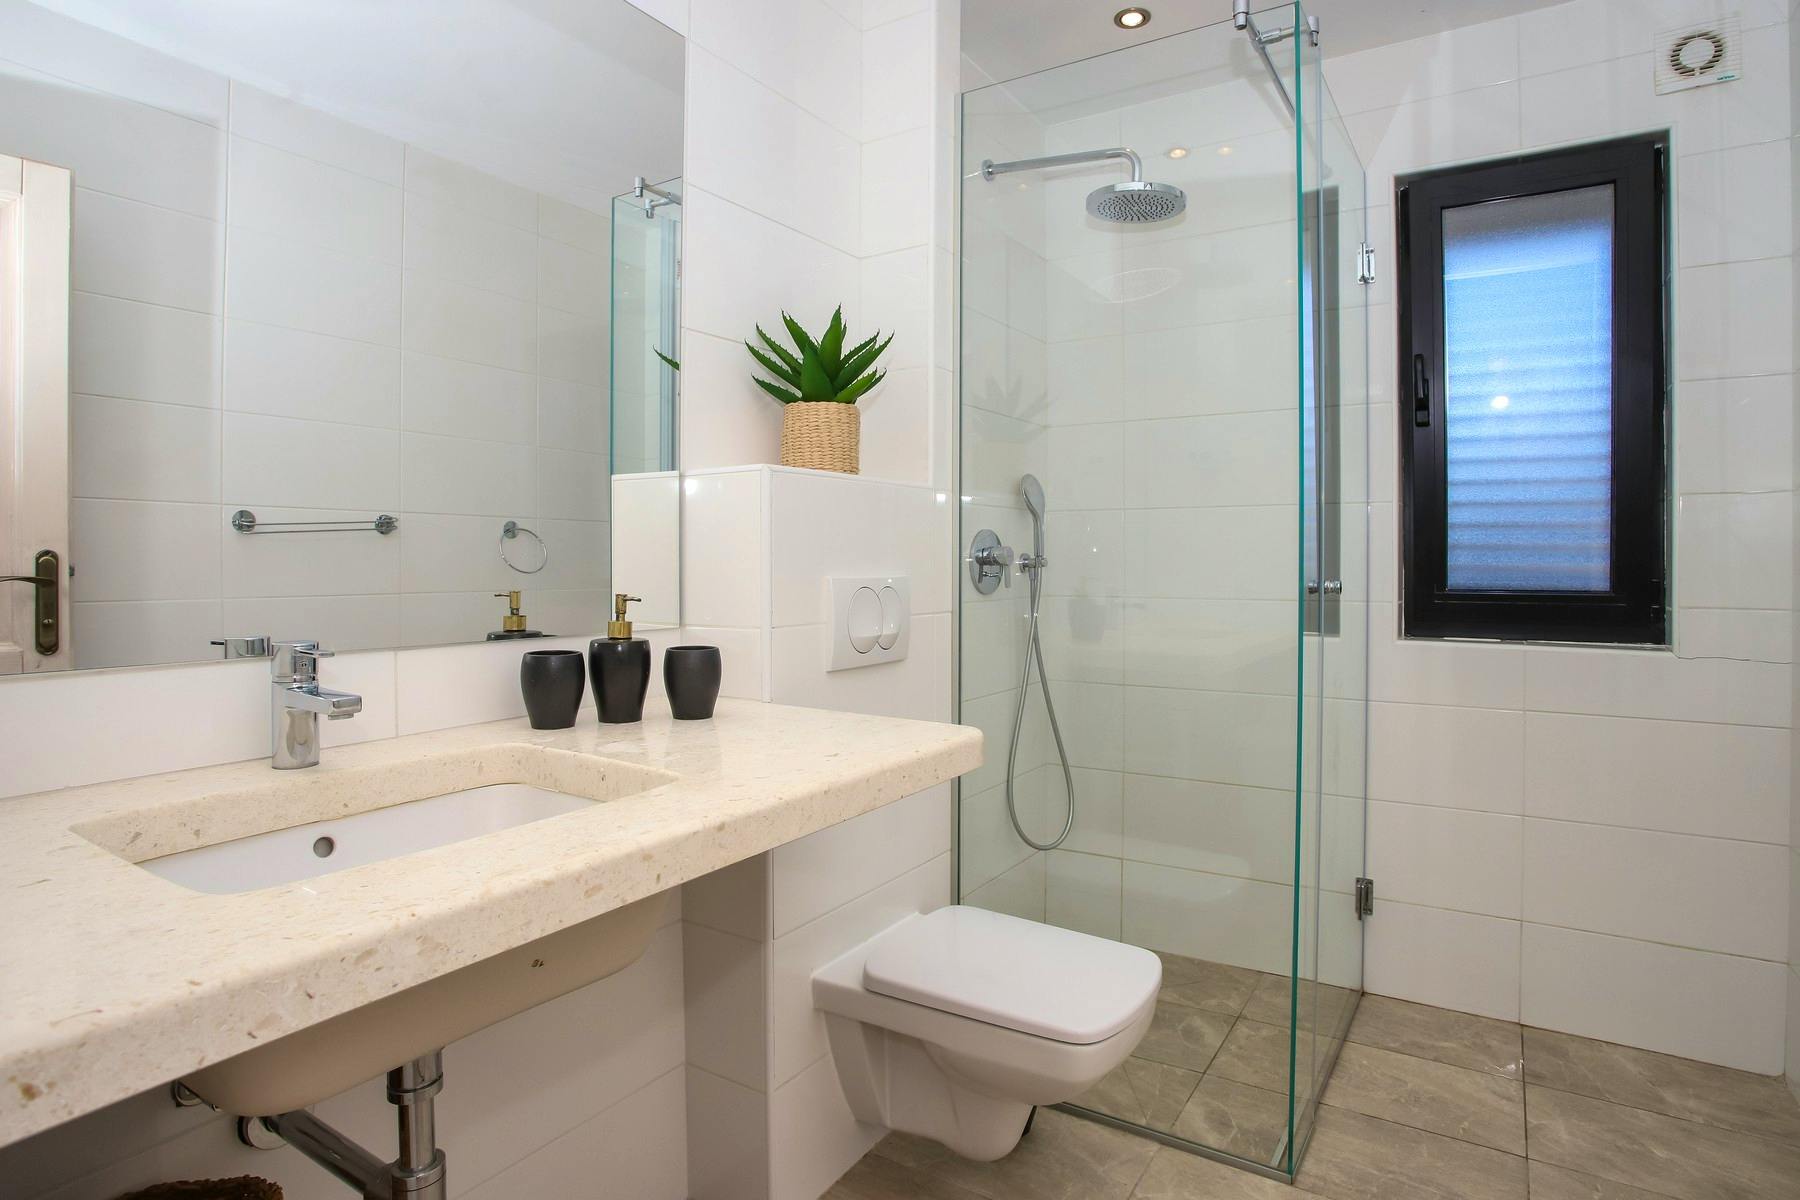 Spacious bathroom with walk-in shower